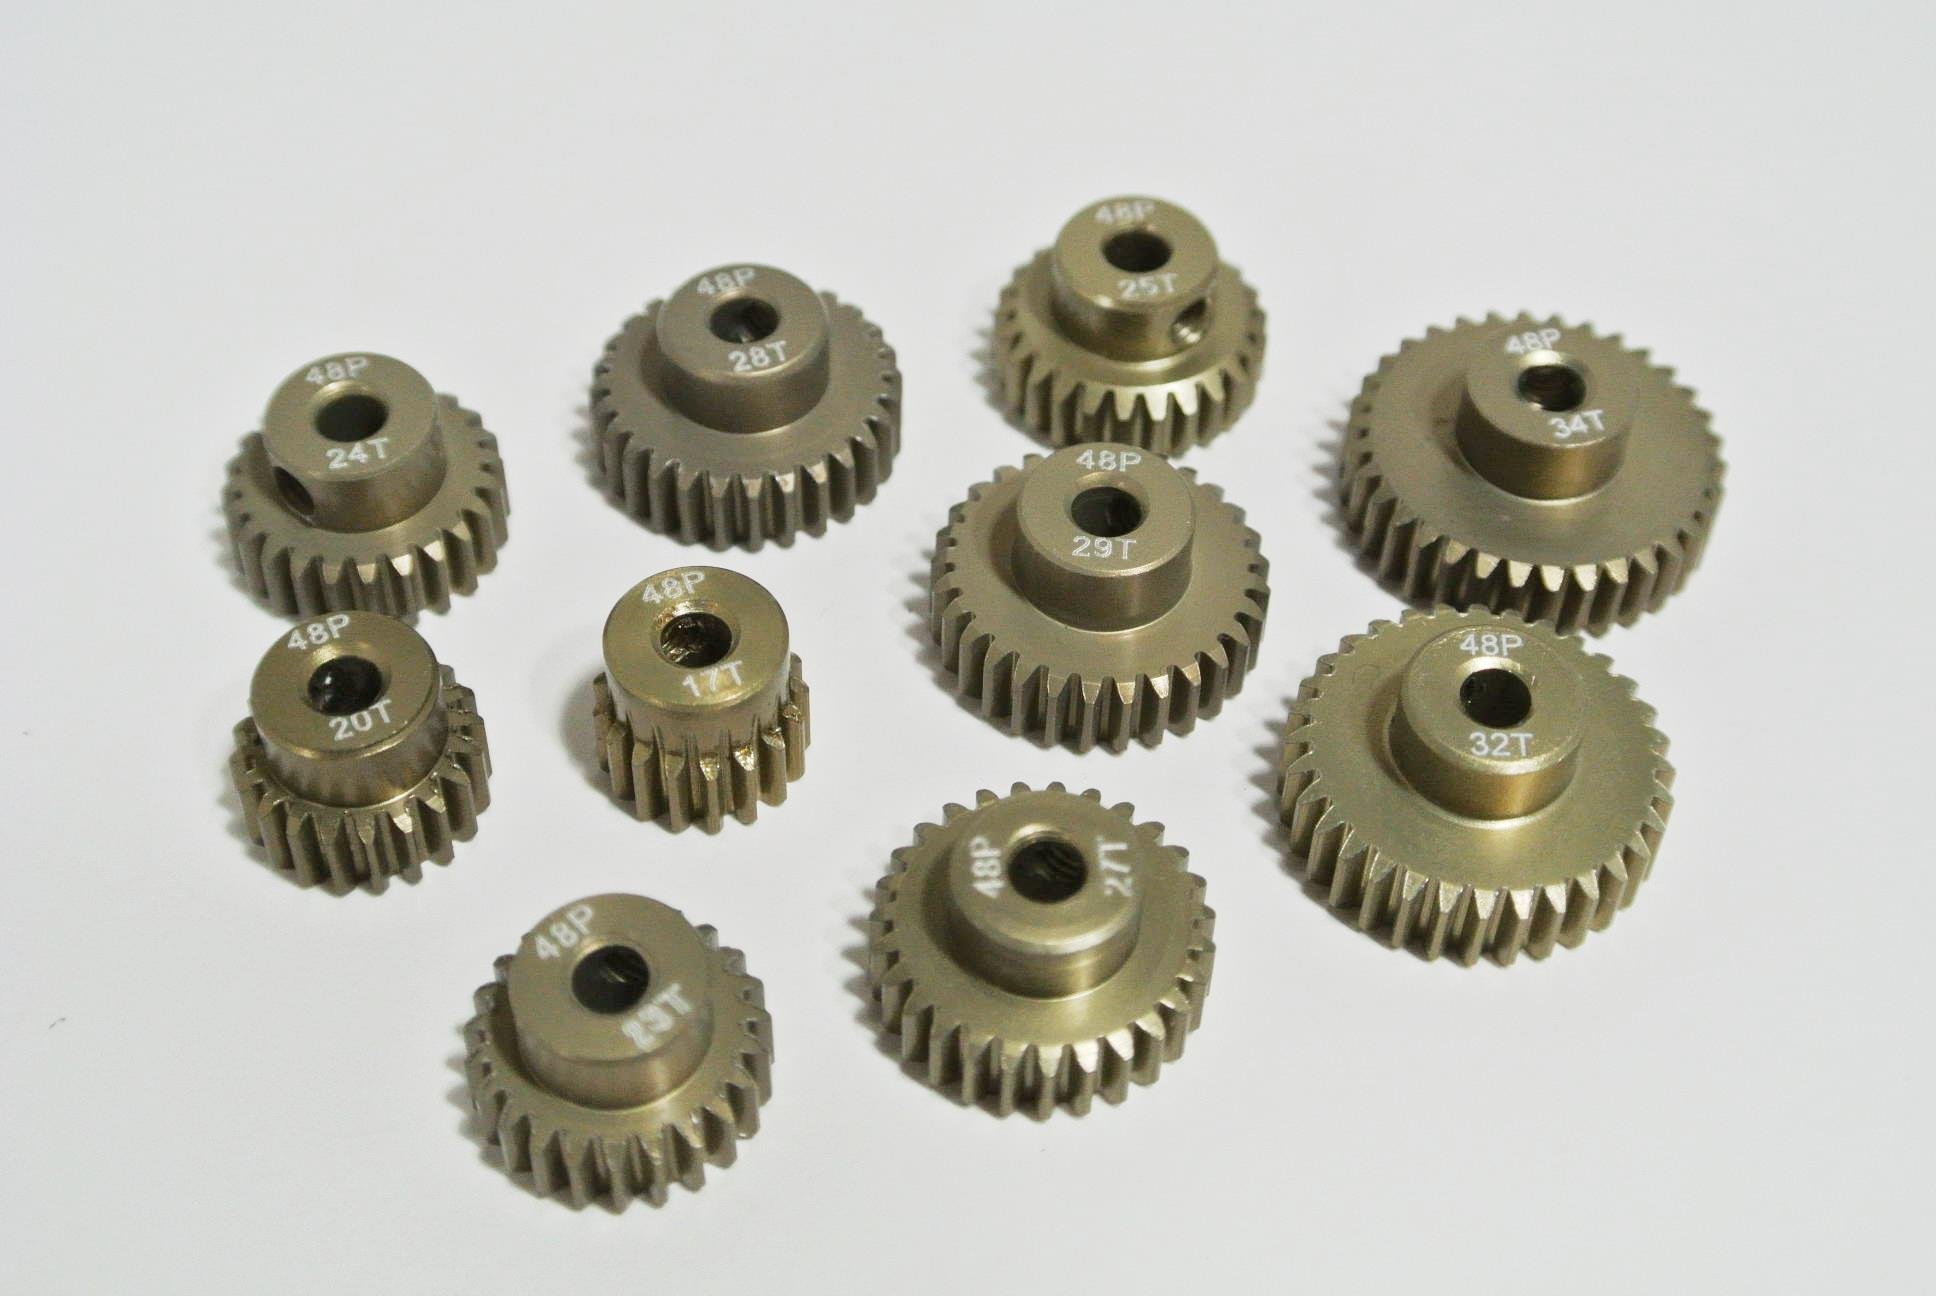 Aluminum Pinion Gear Set 48P Pinion Gear Set with Screw Driver for Motors with 1/8 Output Shaft WEISHUJI 4PCS 48P Pinion Gear Set 28T 29T 30T 31T 